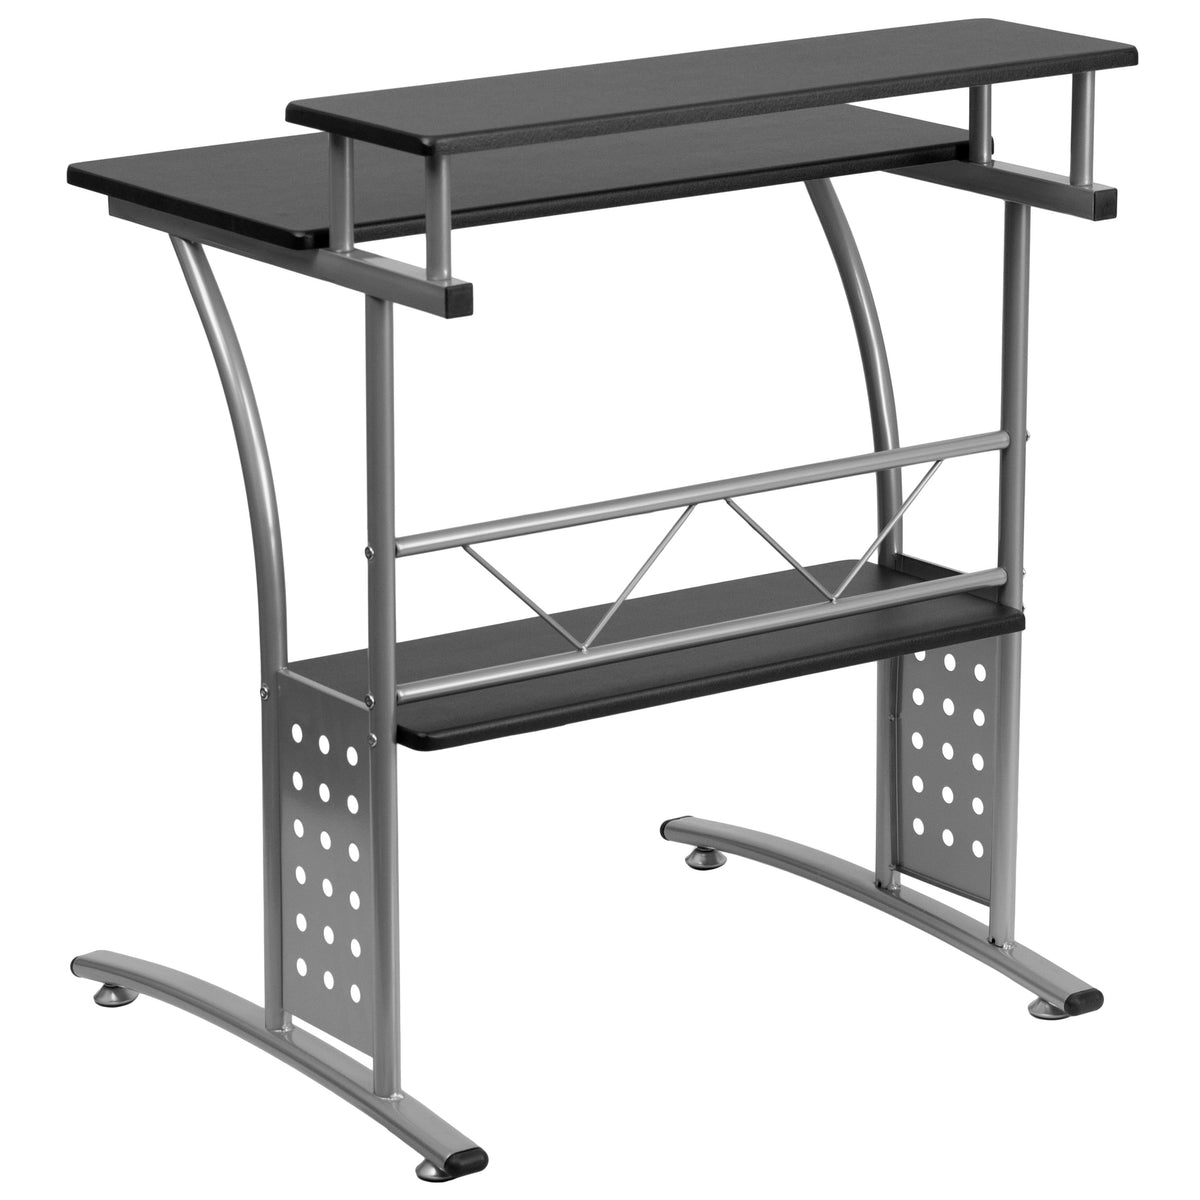 Black |#| Black Computer Desk with Perforated Side Paneling and Raised Monitor Shelf